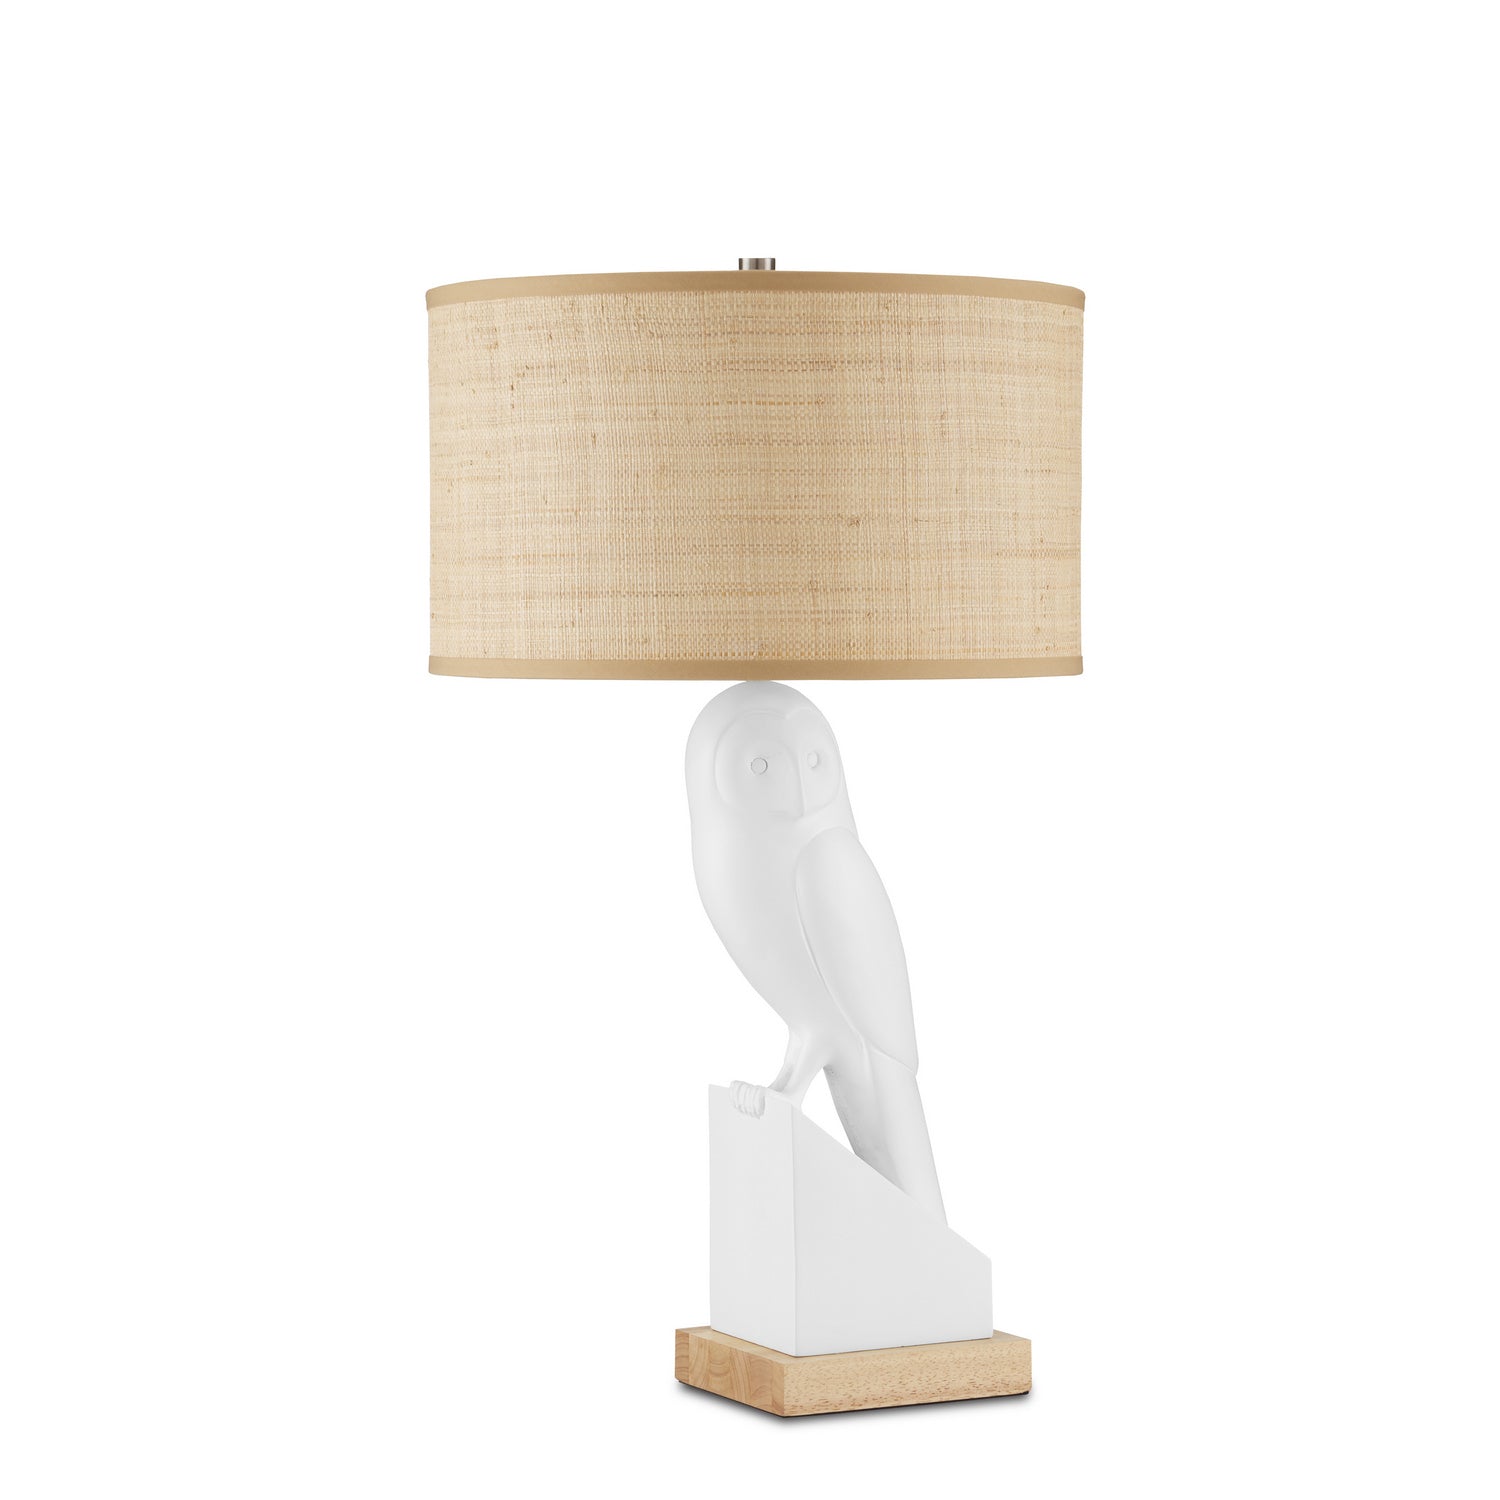 One Light Table Lamp from the Snowy collection in White/Natural Wood/Polished Nickel finish